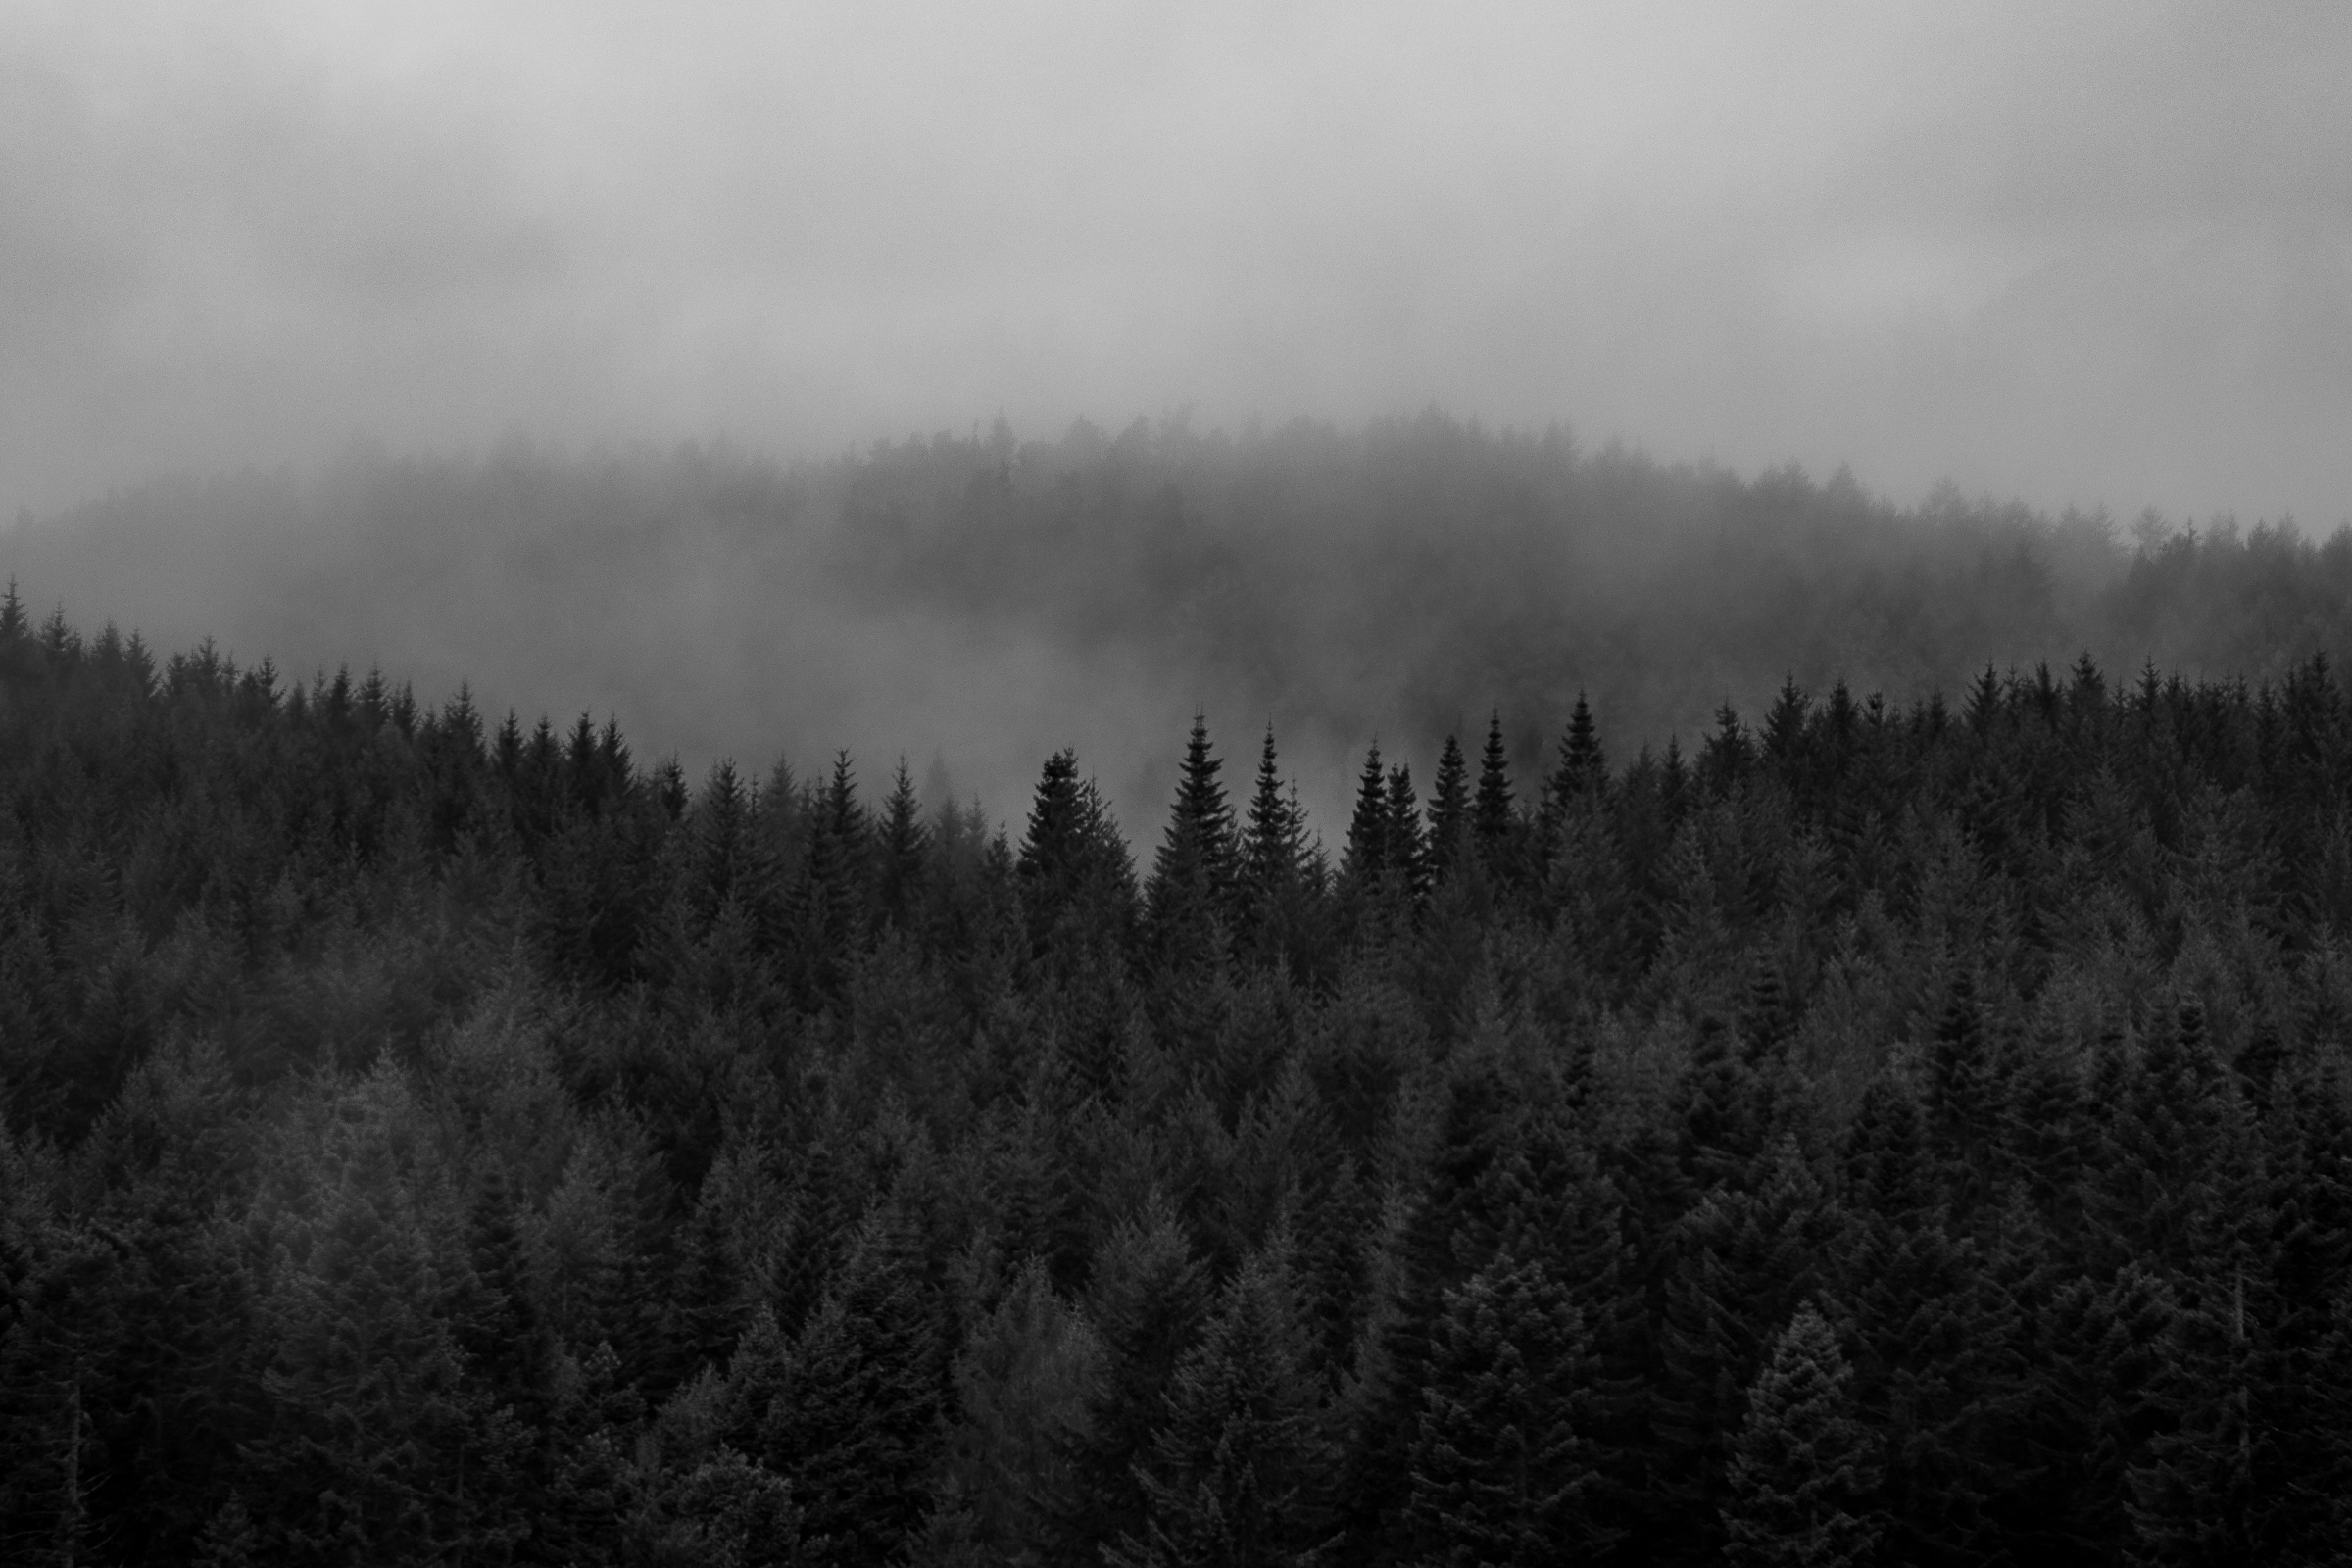 A black-and-white photo of tree tops fading behind mist towards the background.